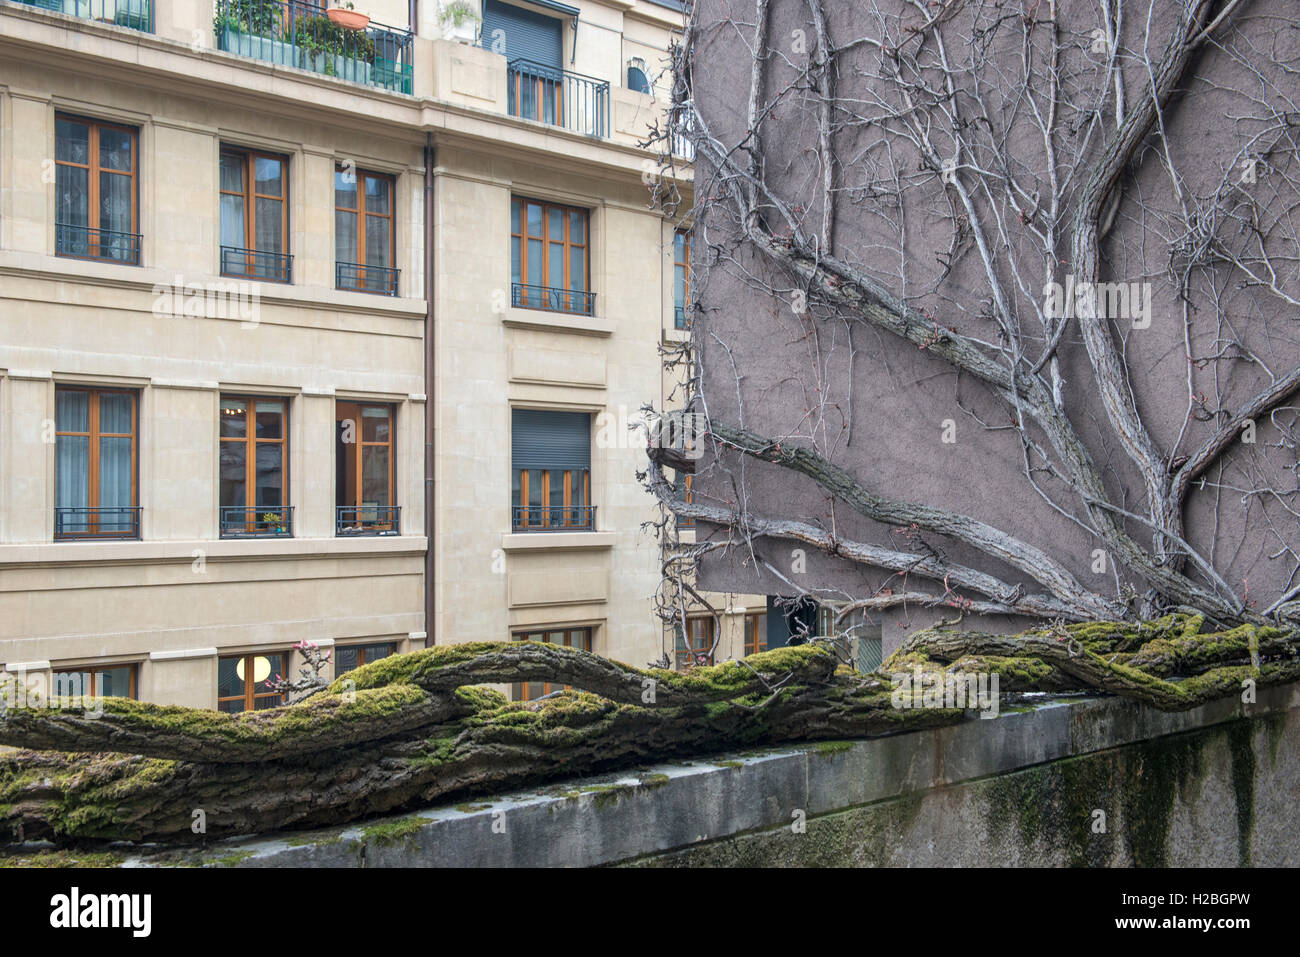 Leafless creeper climbing a balcony and house wall, old town of Geneva, Switzerland Stock Photo